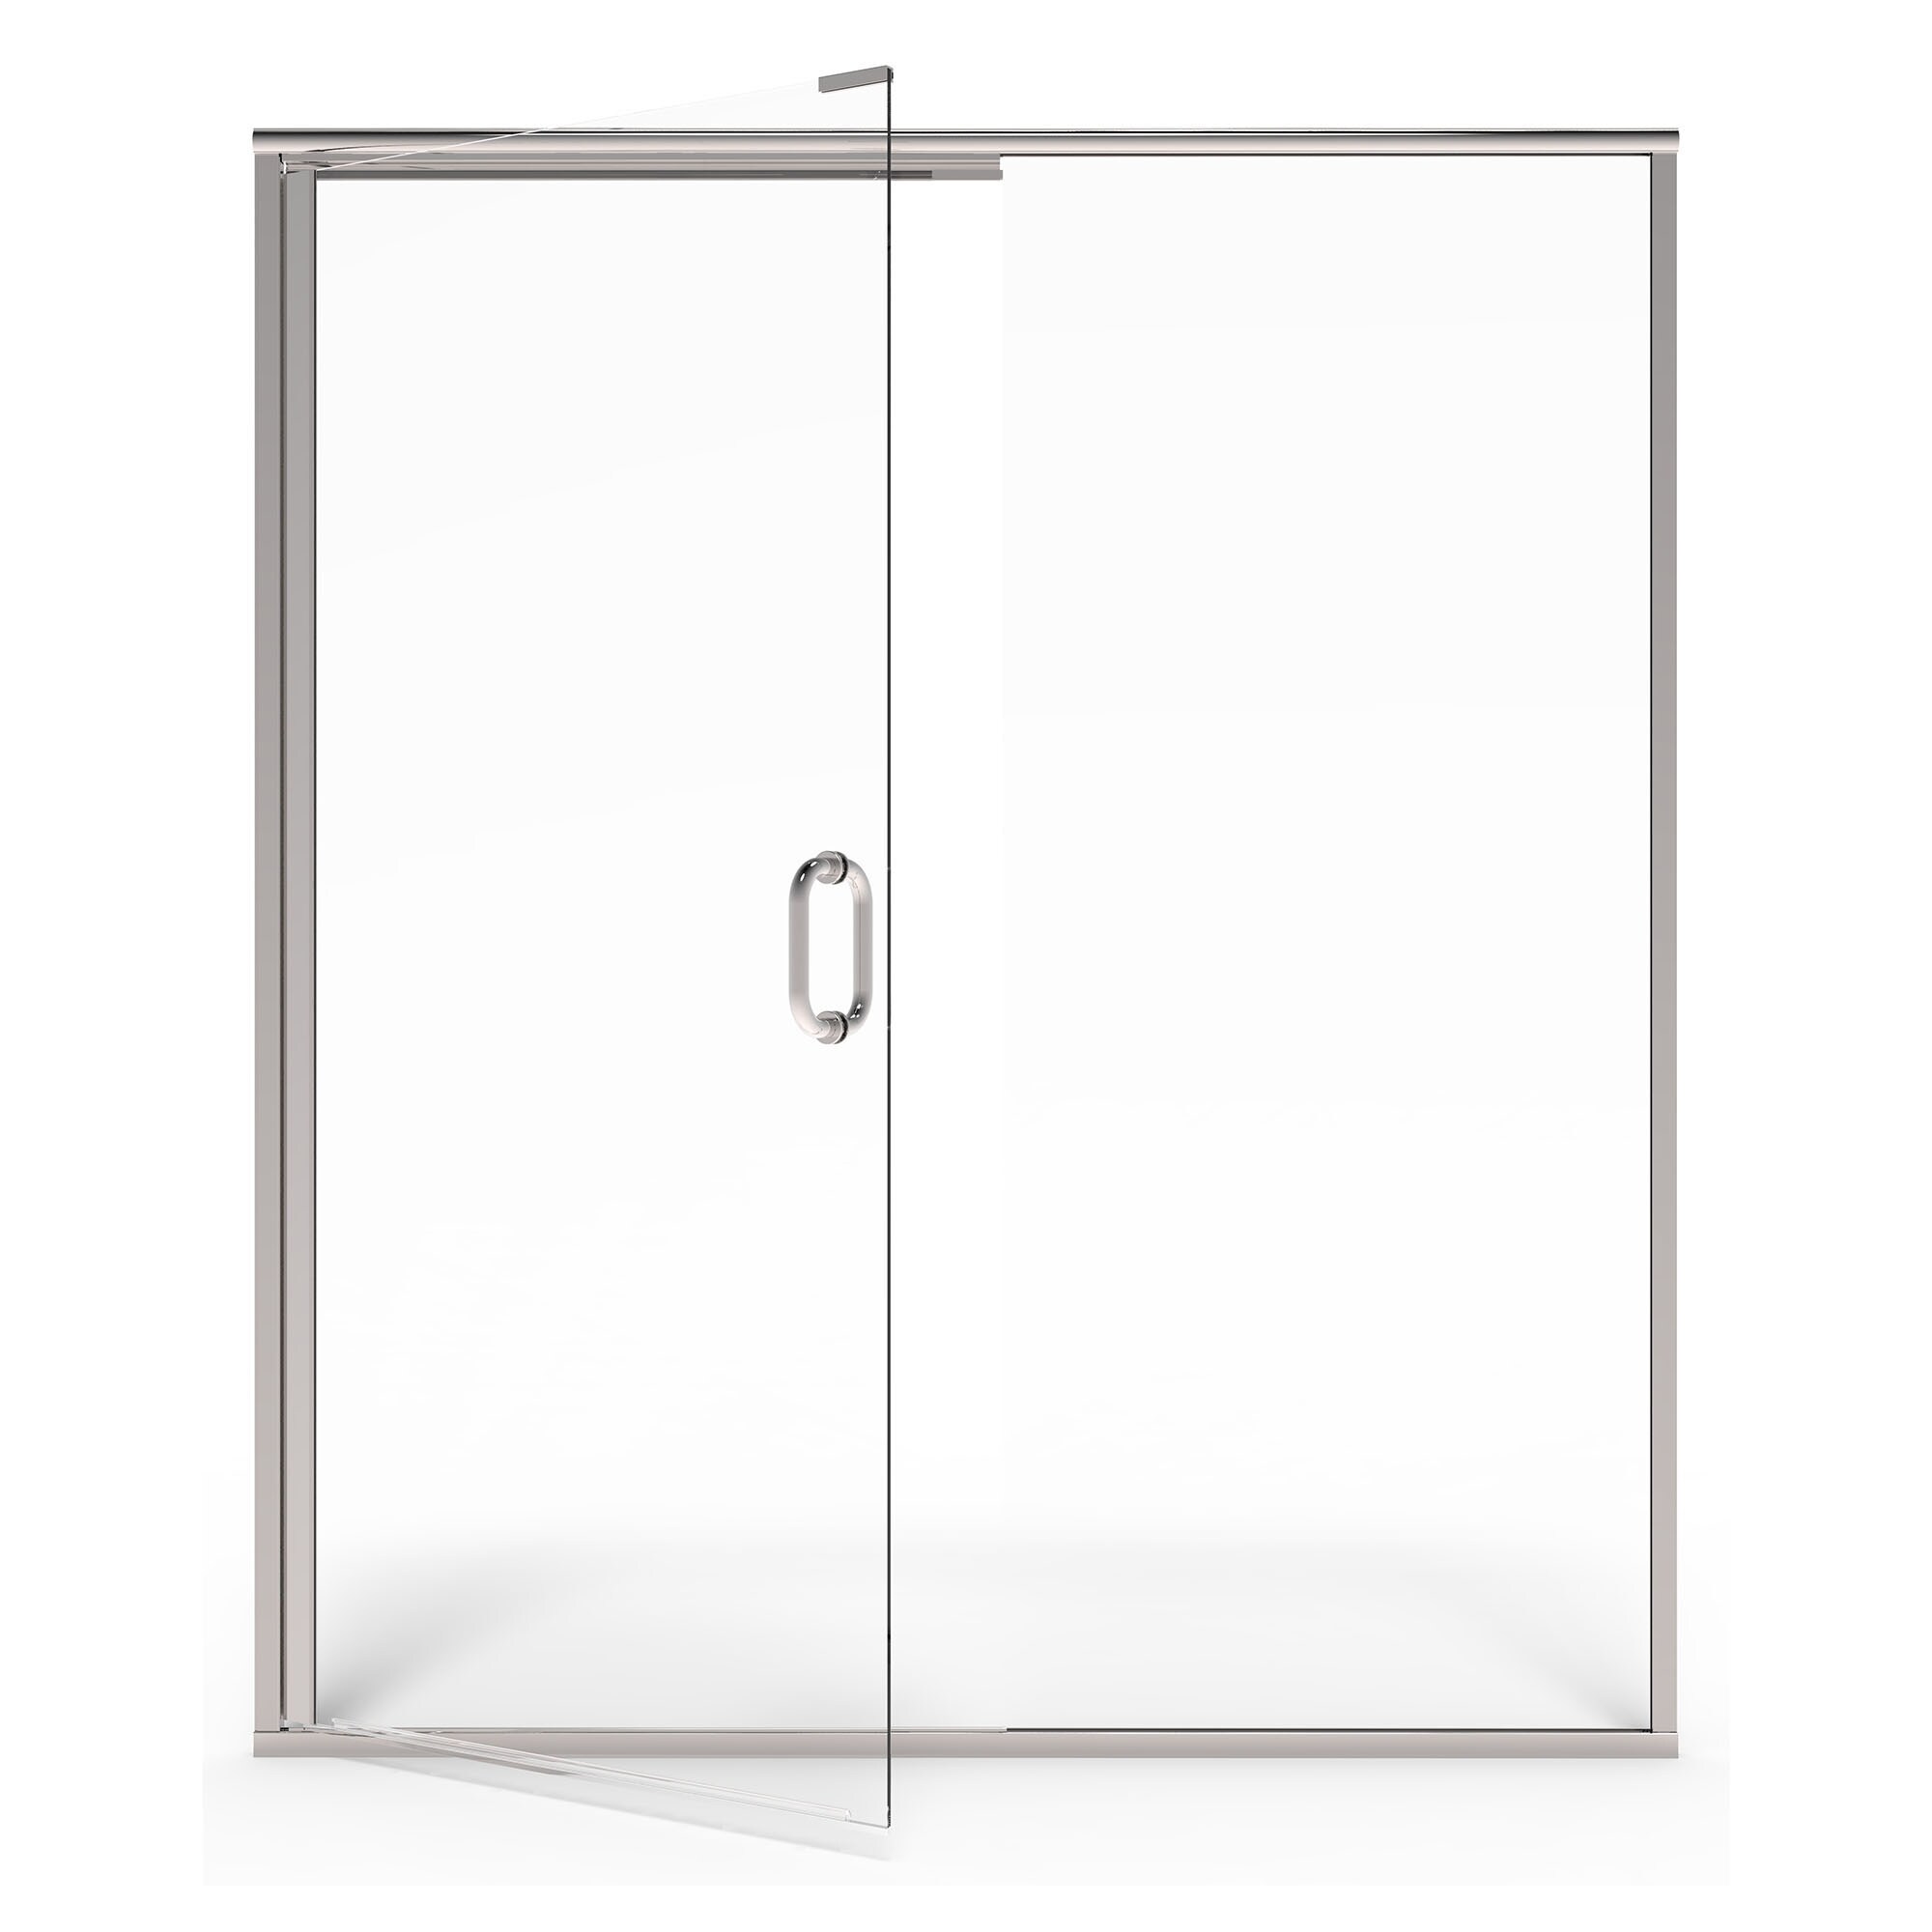 Silver Shine 56-in to 60-in x 76-in Semi-frameless Hinged Soft Close Shower Door | - American Standard AM00816400.213